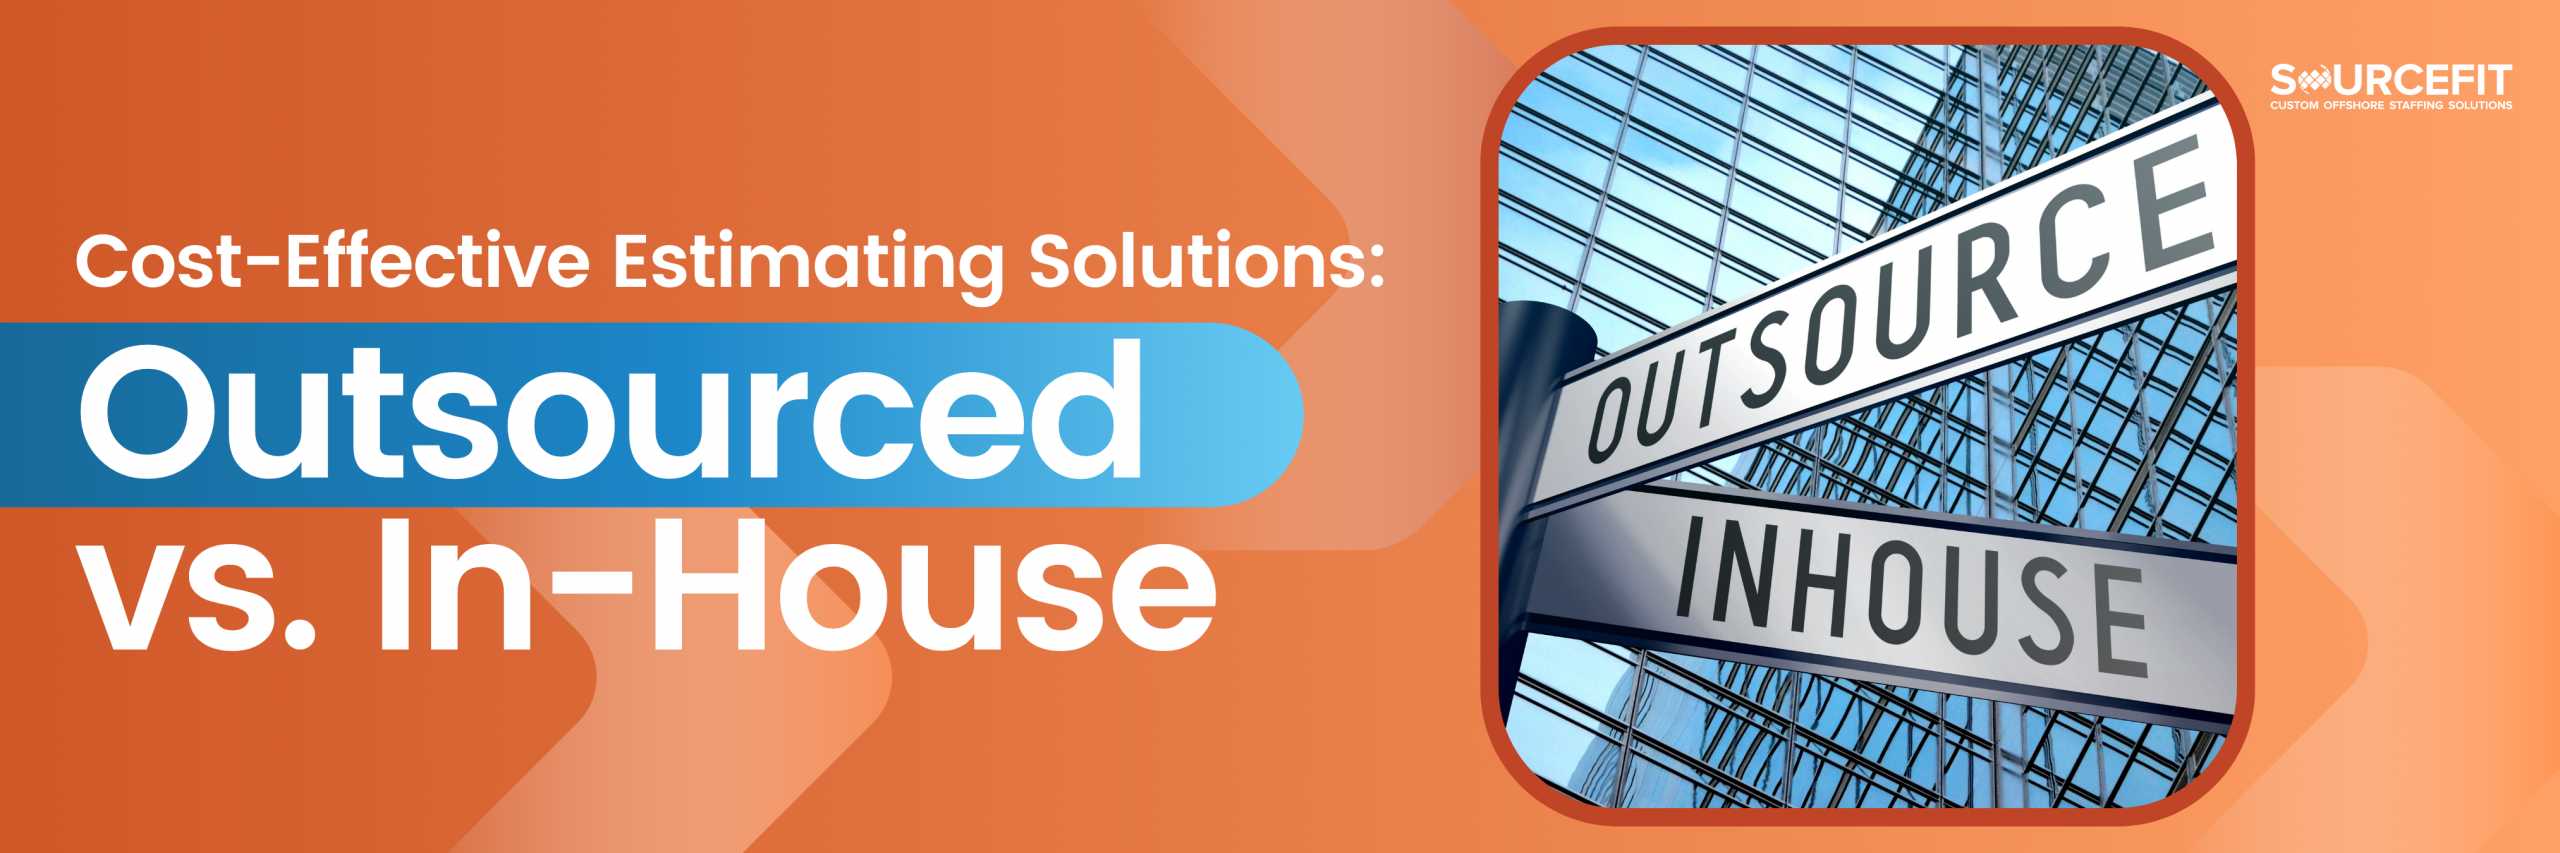 Cost-Effective Estimating Solutions Outsourced vs. In-House_Header Image (2)